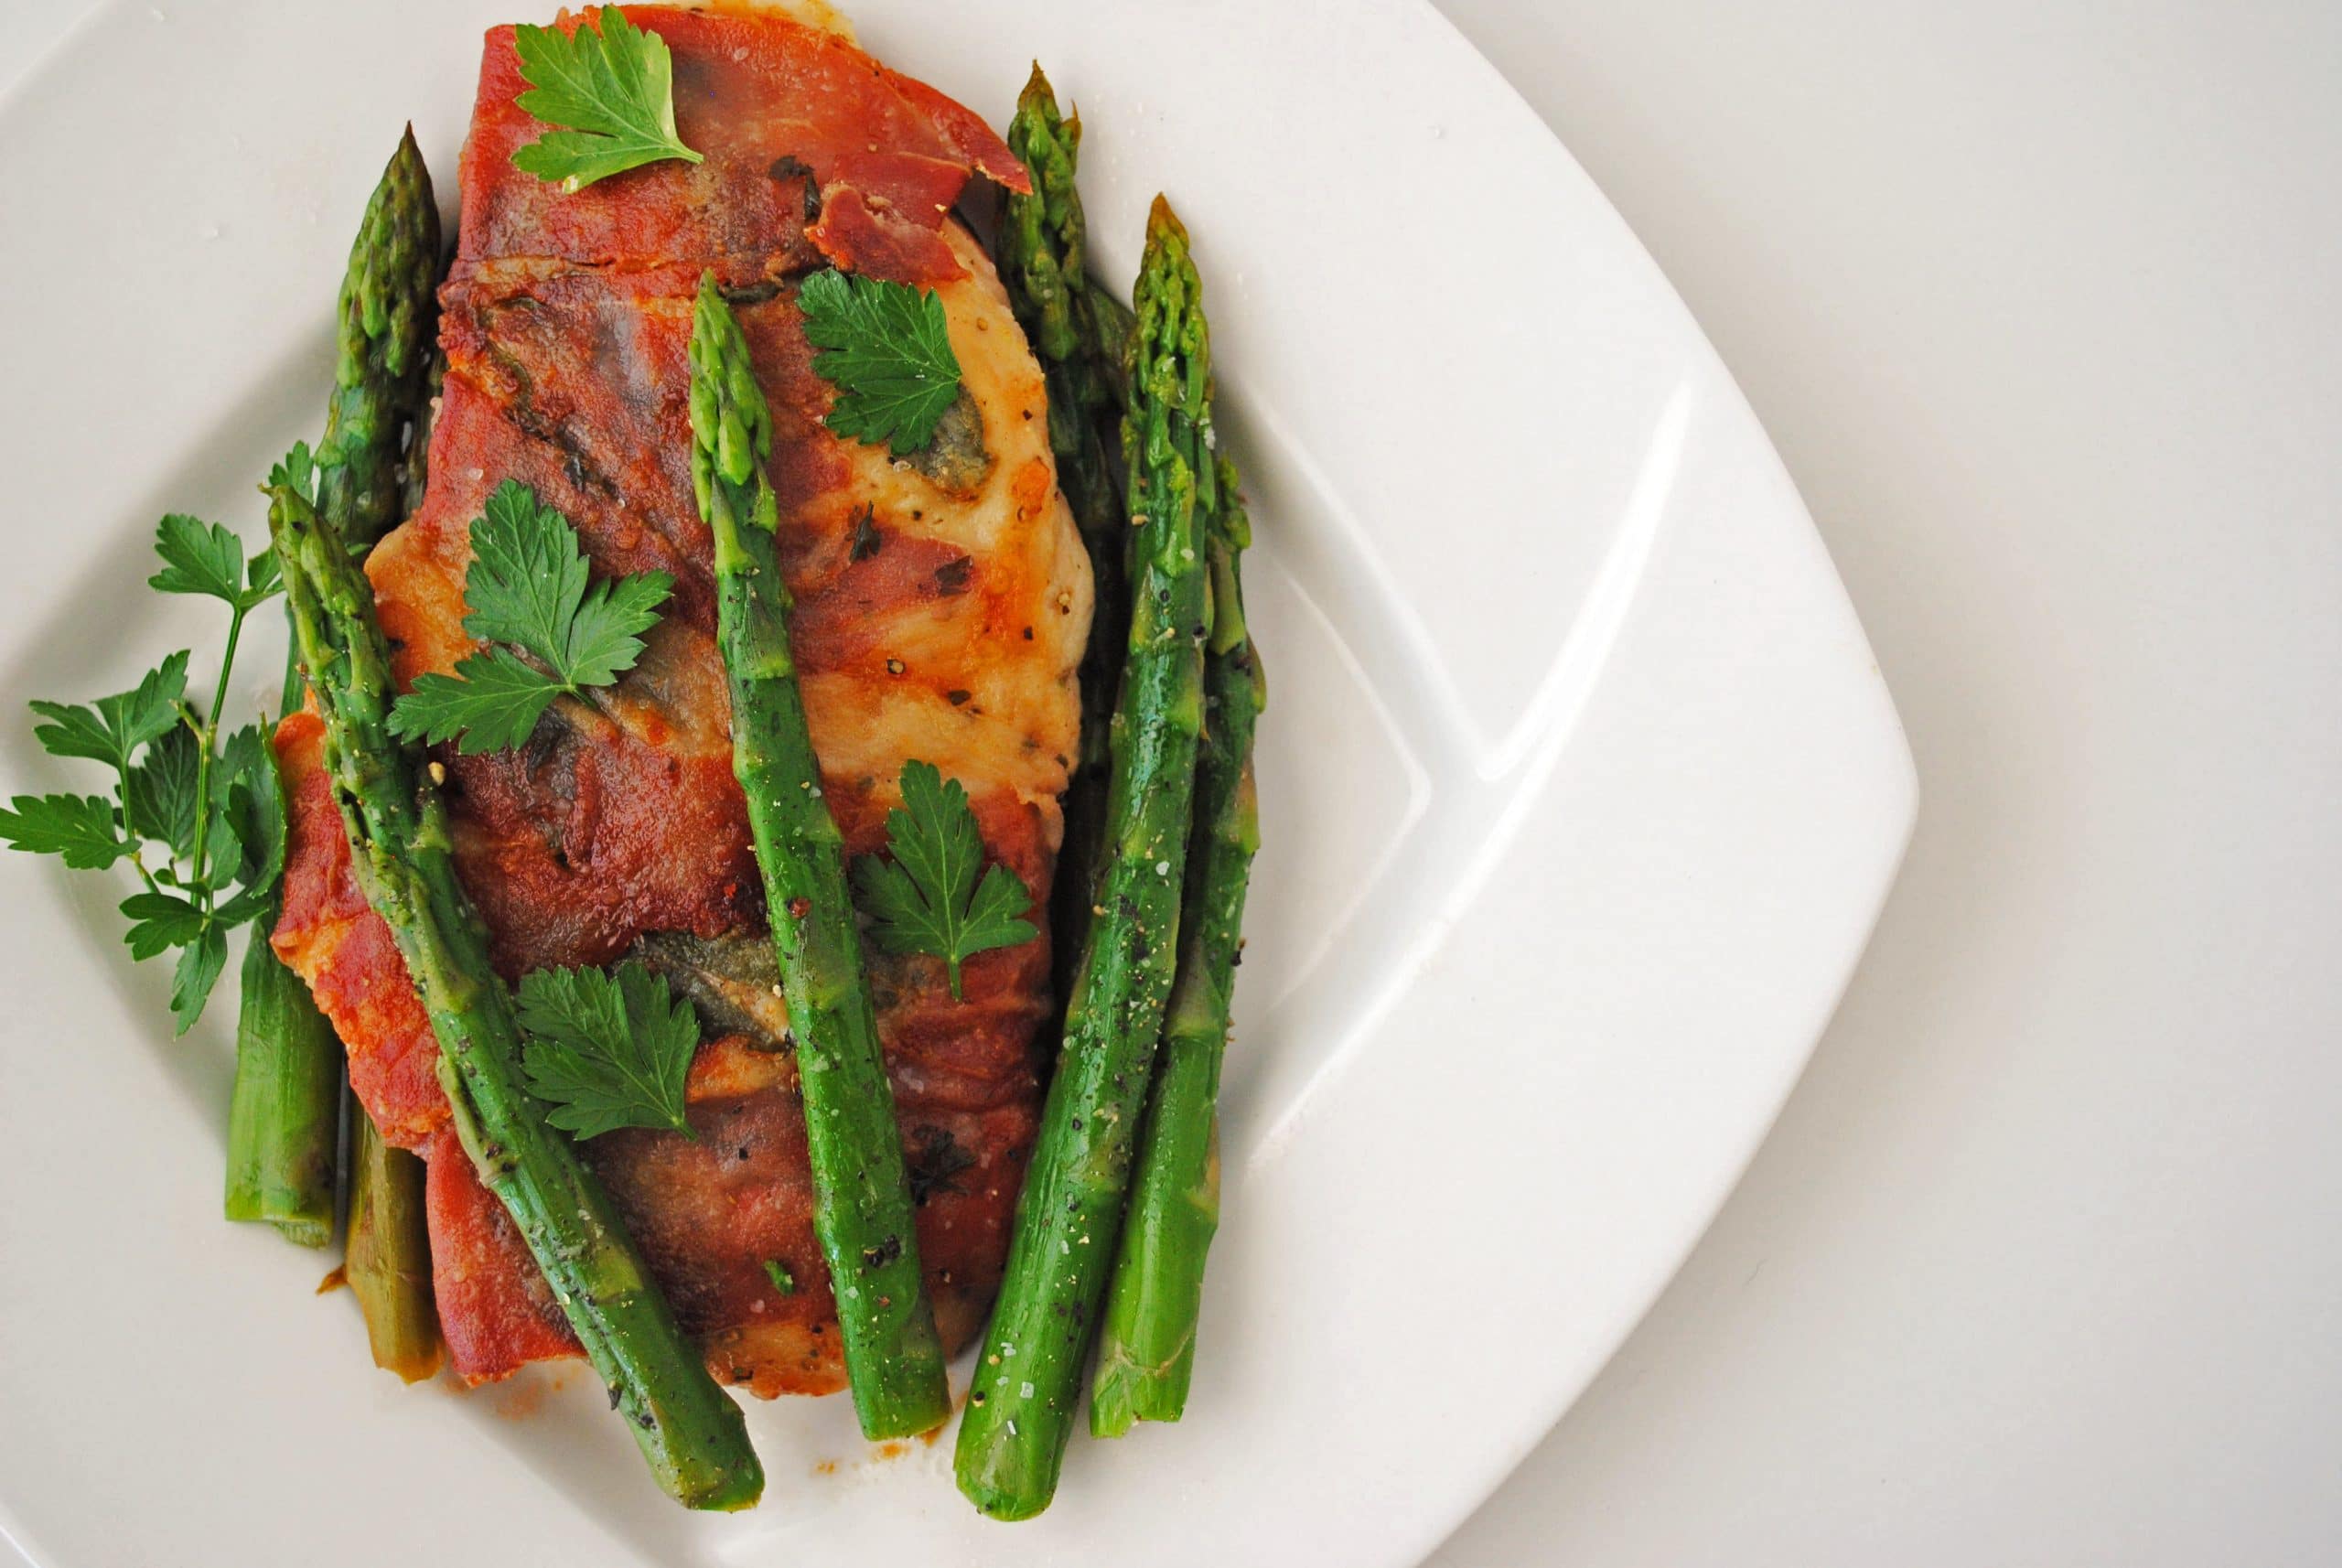 Chicken Saltimbocca with Asparagus